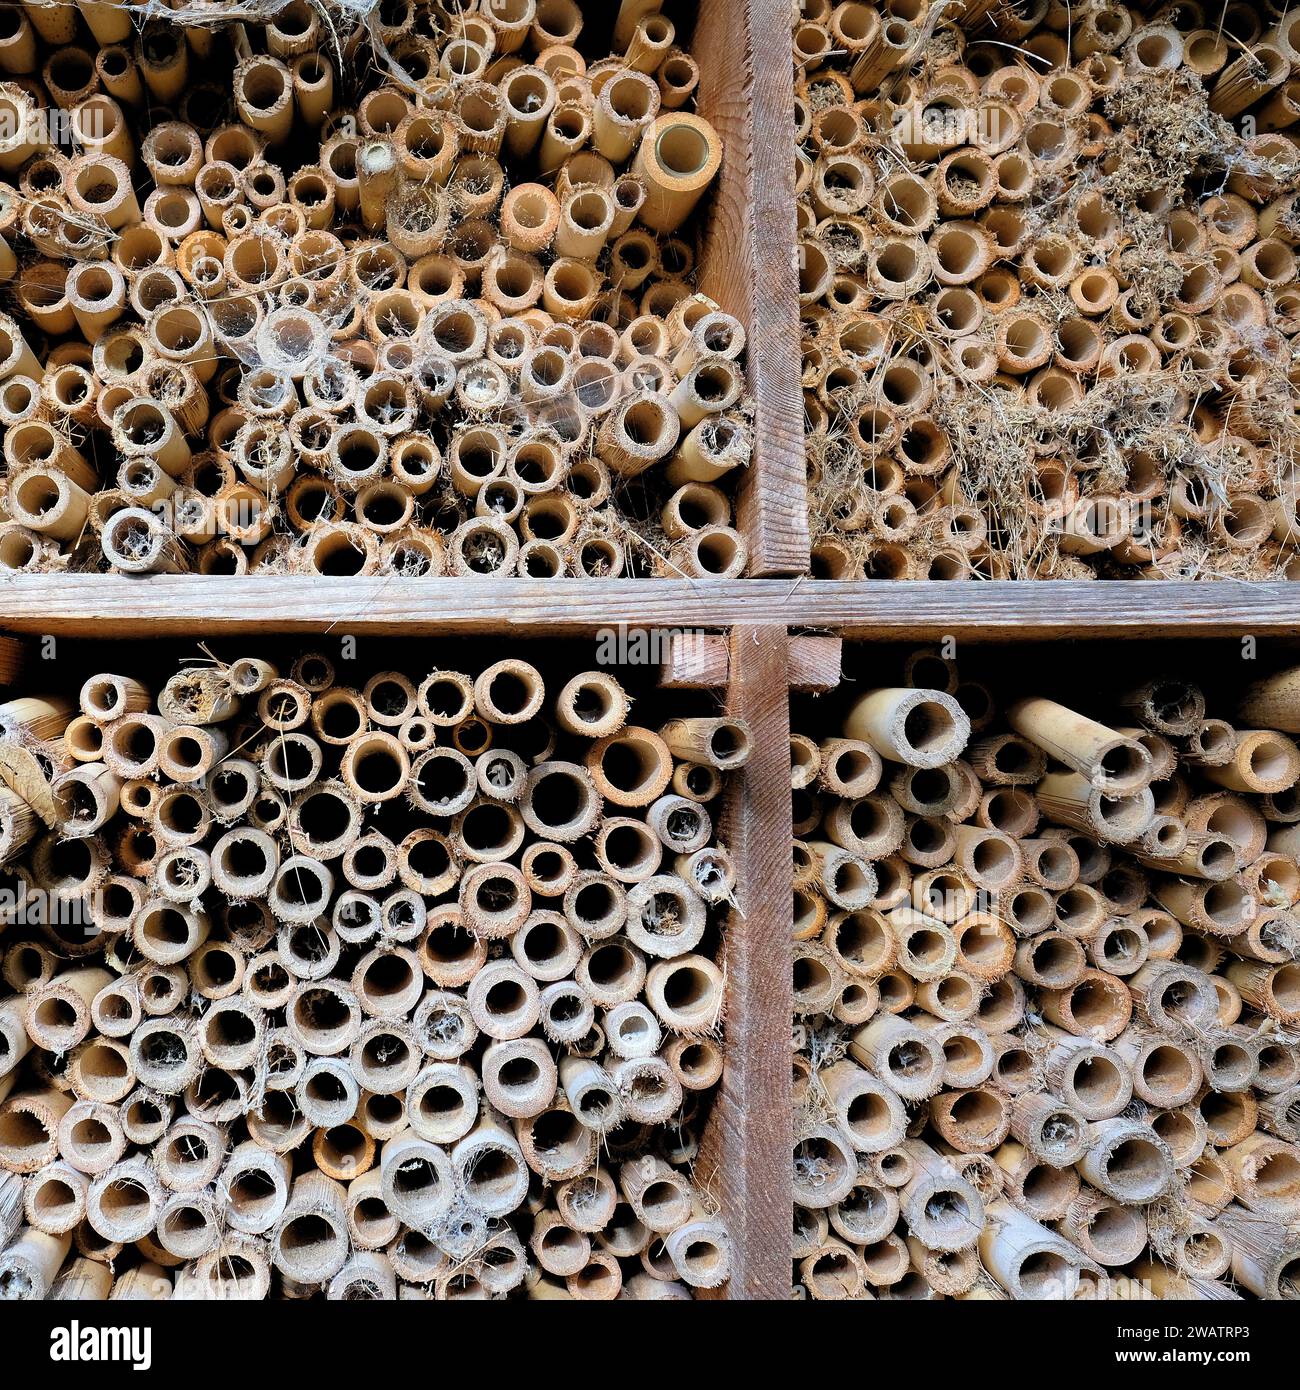 Close-up of an old abandoned bamboo beehive made to support bee populations and pollination, can be used for nesting and honey production. Stock Photo